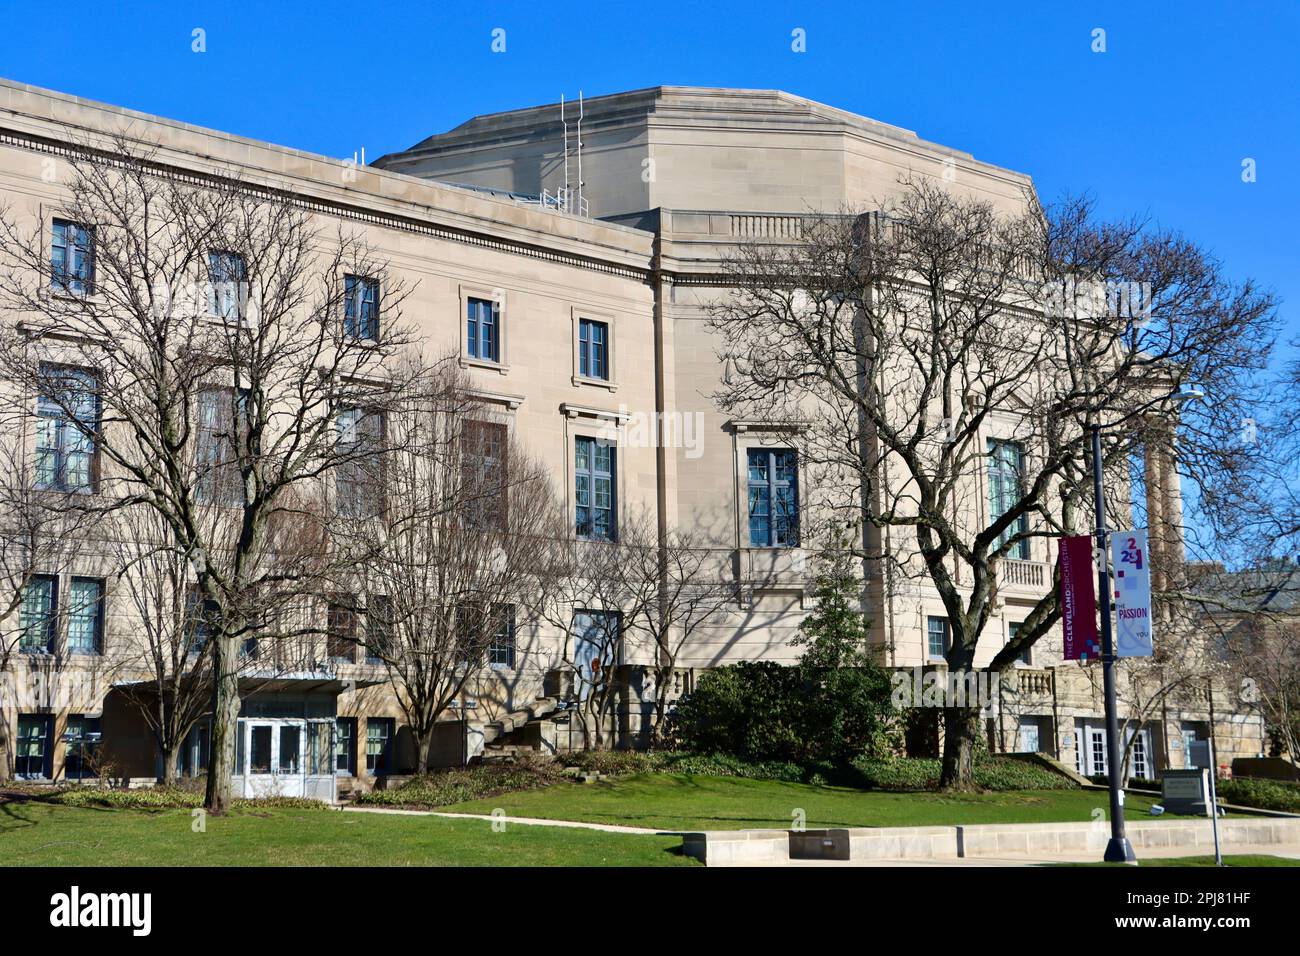 Severance Music Center, Severance Hall, the home of Cleveland Orchestra on Euclid Avenue at University Circle in Cleveland, Ohio Stock Photo